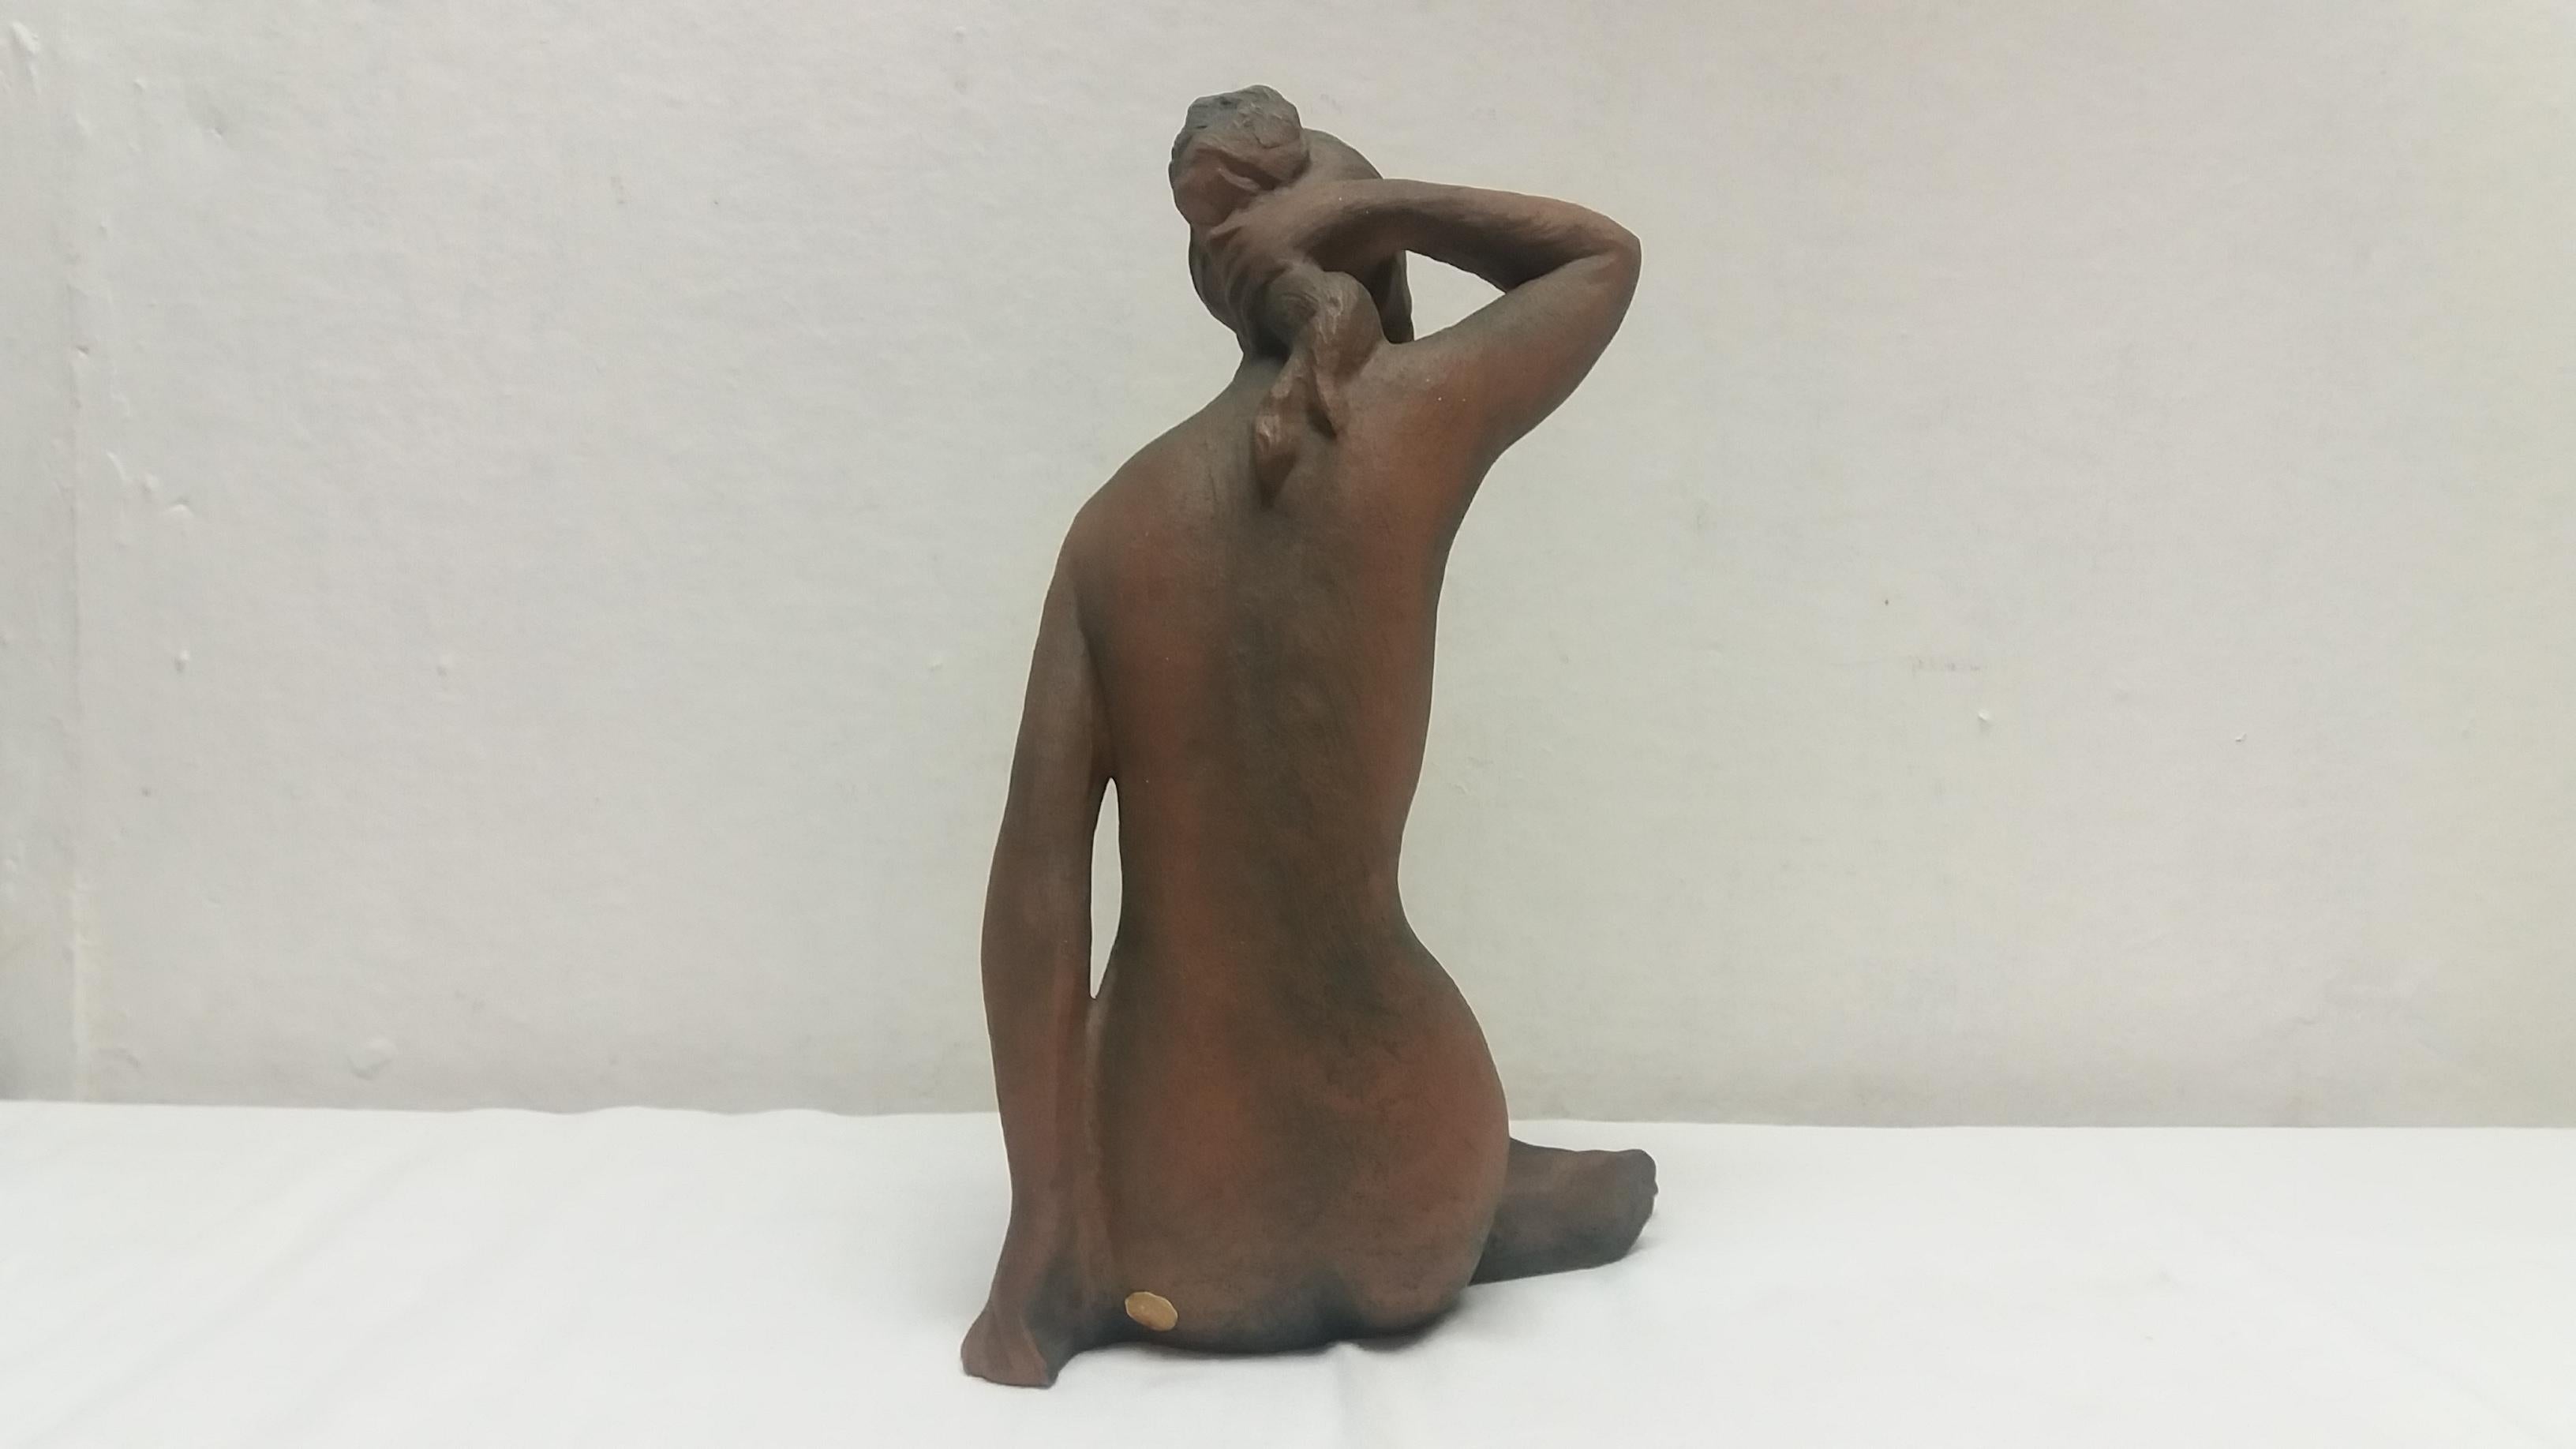 Mid-Century Modern Midcentury Sculpture of Nude Setting Women Designed by Jitka Forejtová, 1960s